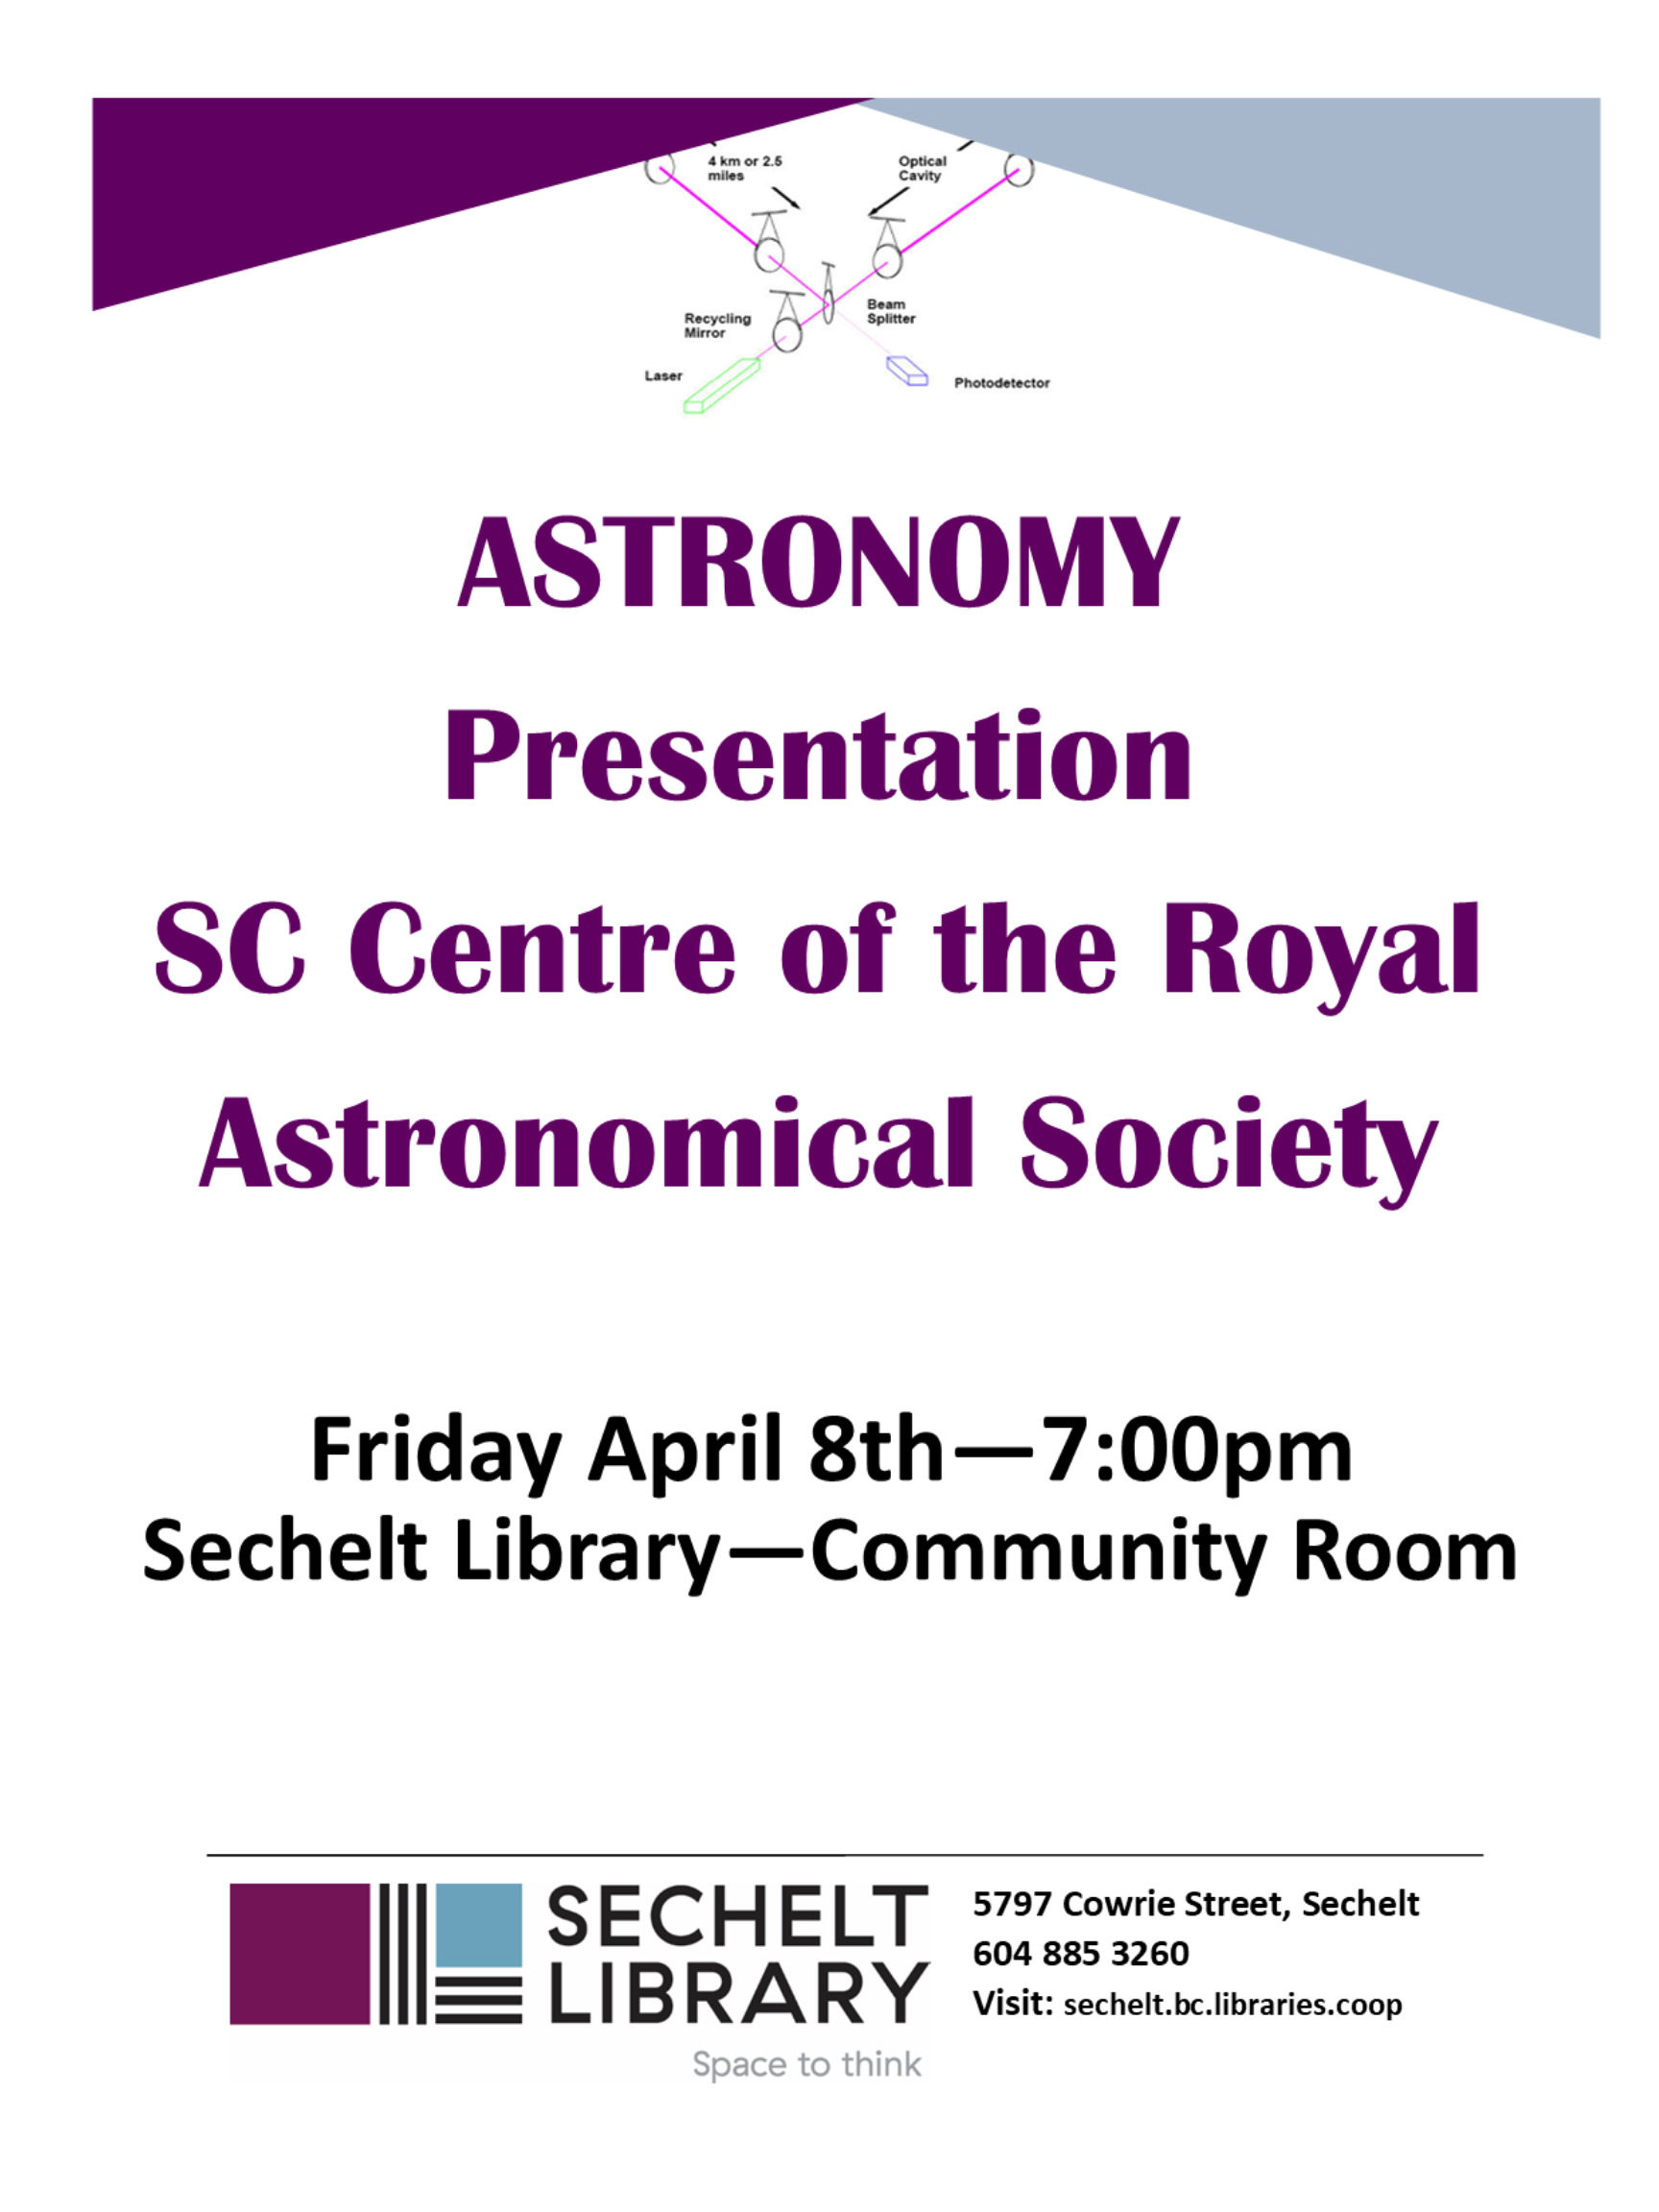 opens poster with information about the Sunshine Coast Astronomy Club's presentation on Friday March, from 11th 7-10pm, via Zoom and in-person in the Community Room.